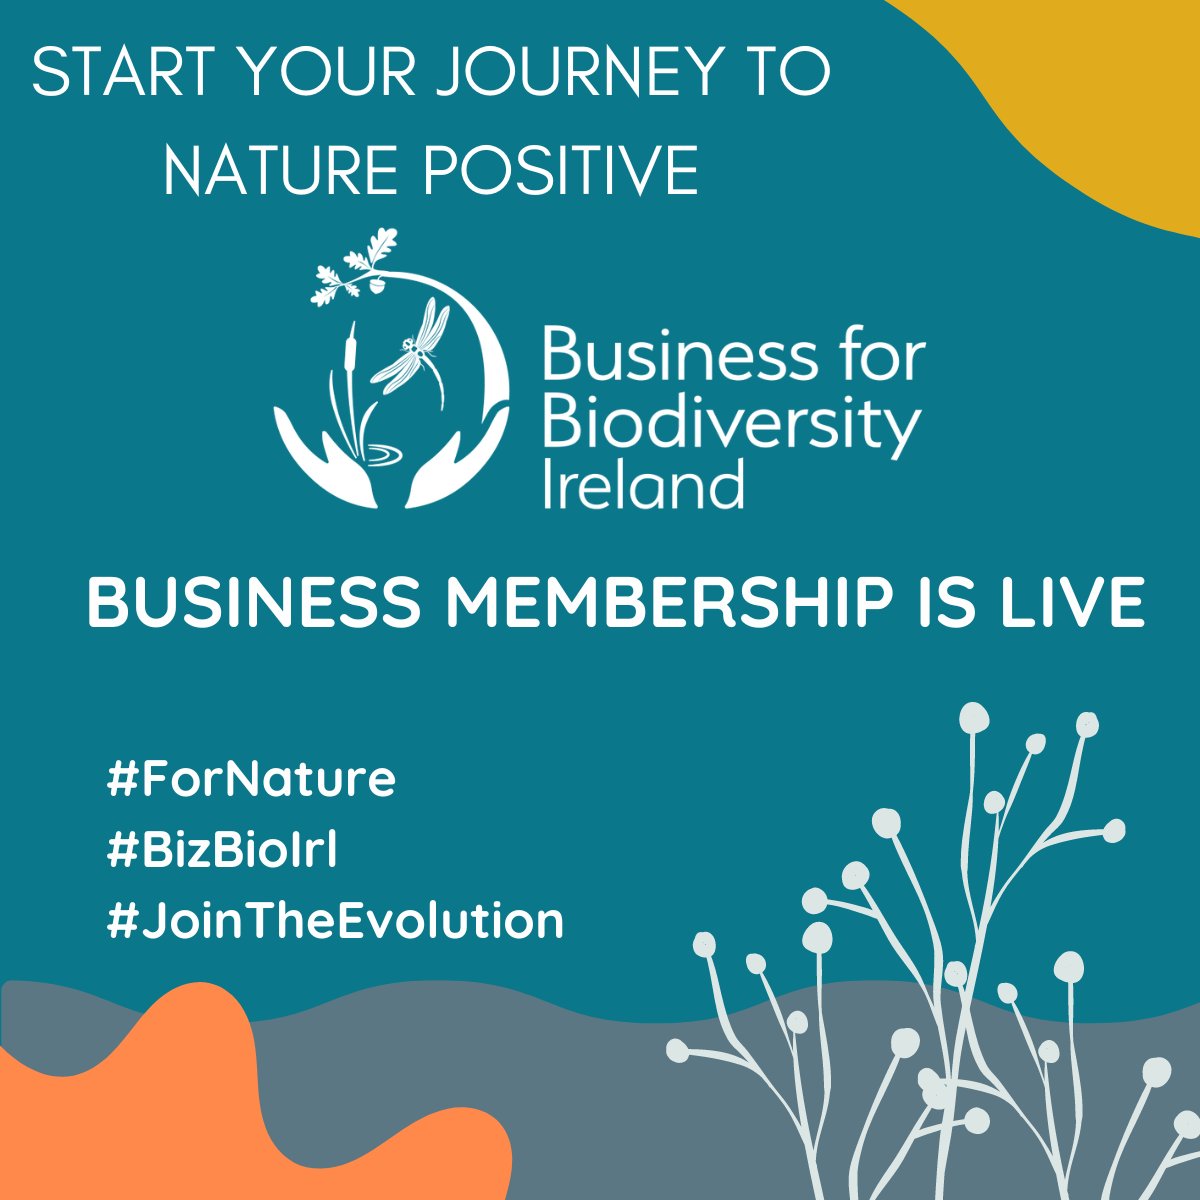 1/2 We are delighted to announce our membership with Business for Biodiversity Ireland as we embrace the journey towards #NaturePositive. #BizBioCoP #NatureIsEveryonesBusiness #ForNature #JoinTheEvolution #BizBioIrl